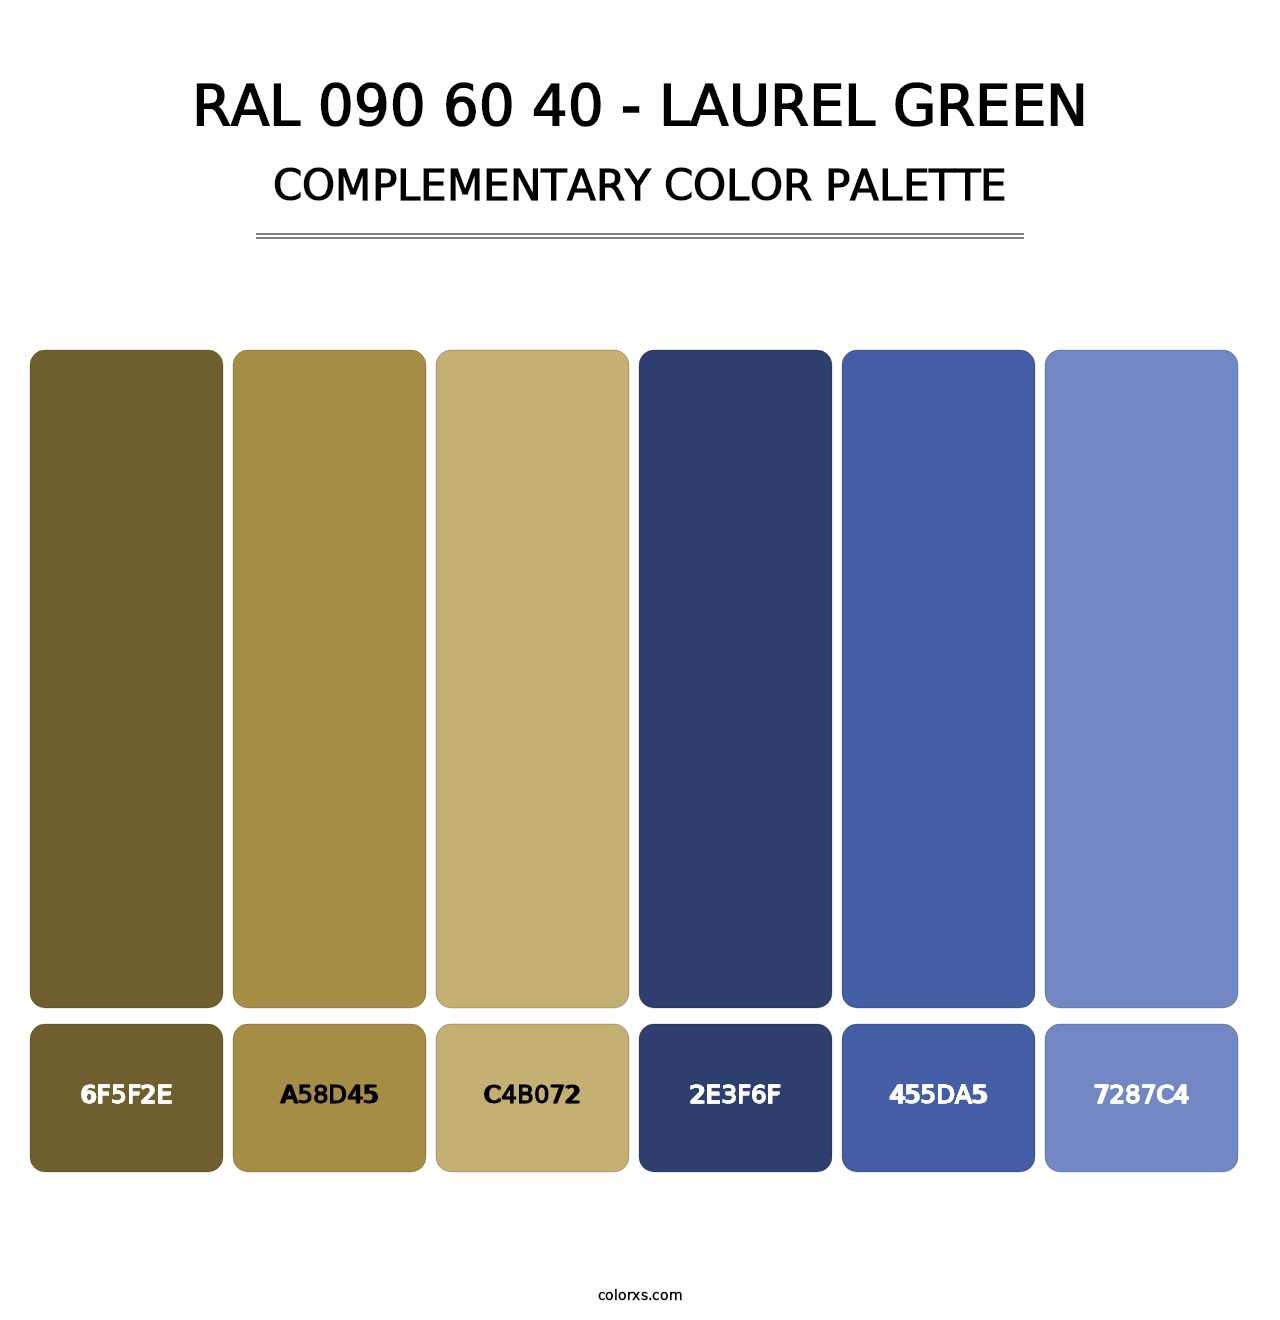 RAL 090 60 40 - Laurel Green - Complementary Color Palette